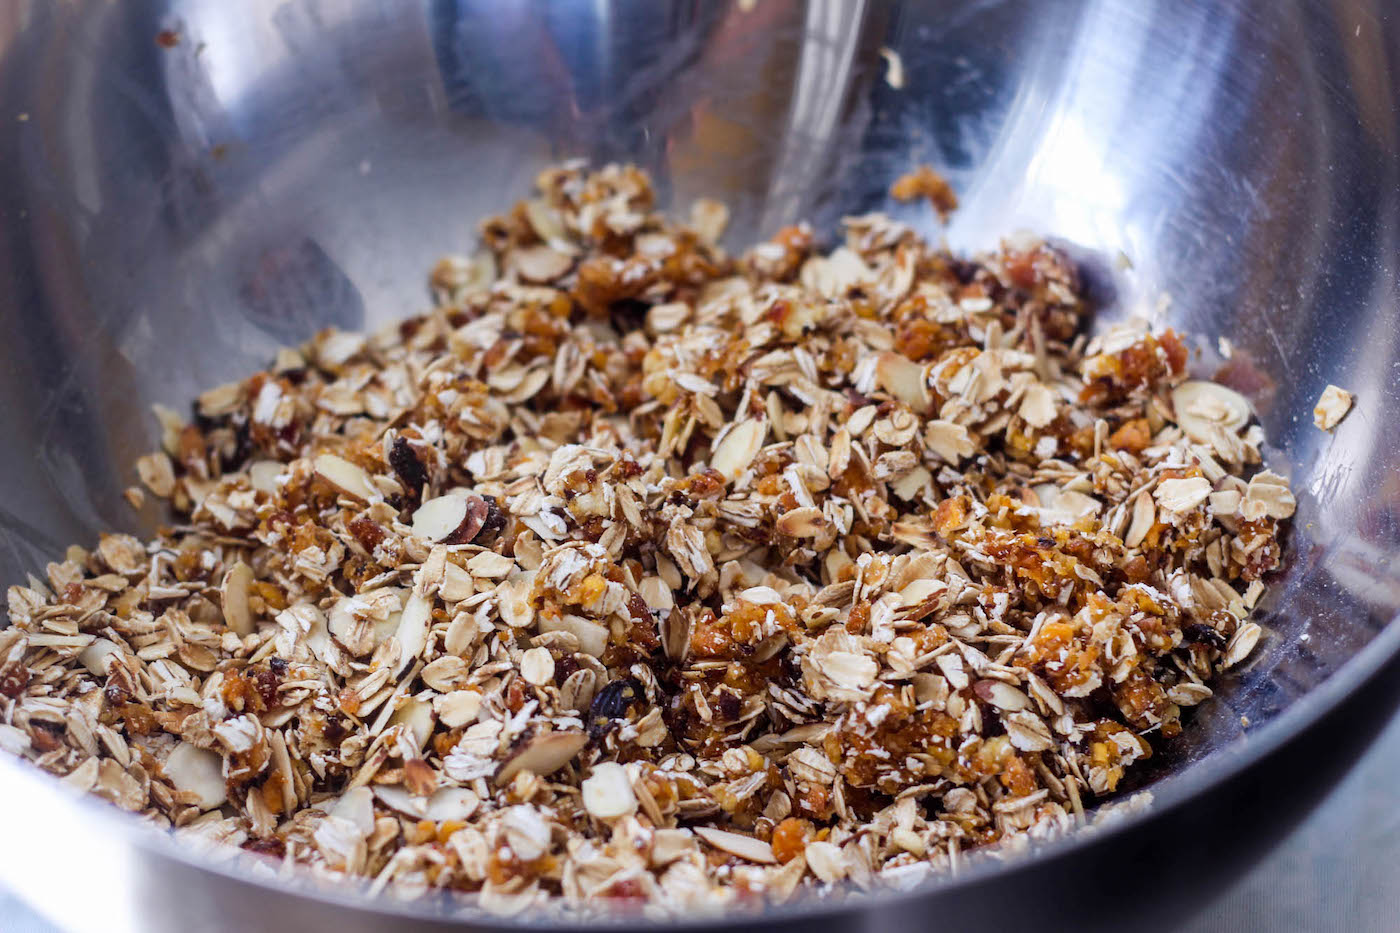 Mixing oats, fruit, and nuts together to make energy bars in a metal bowl